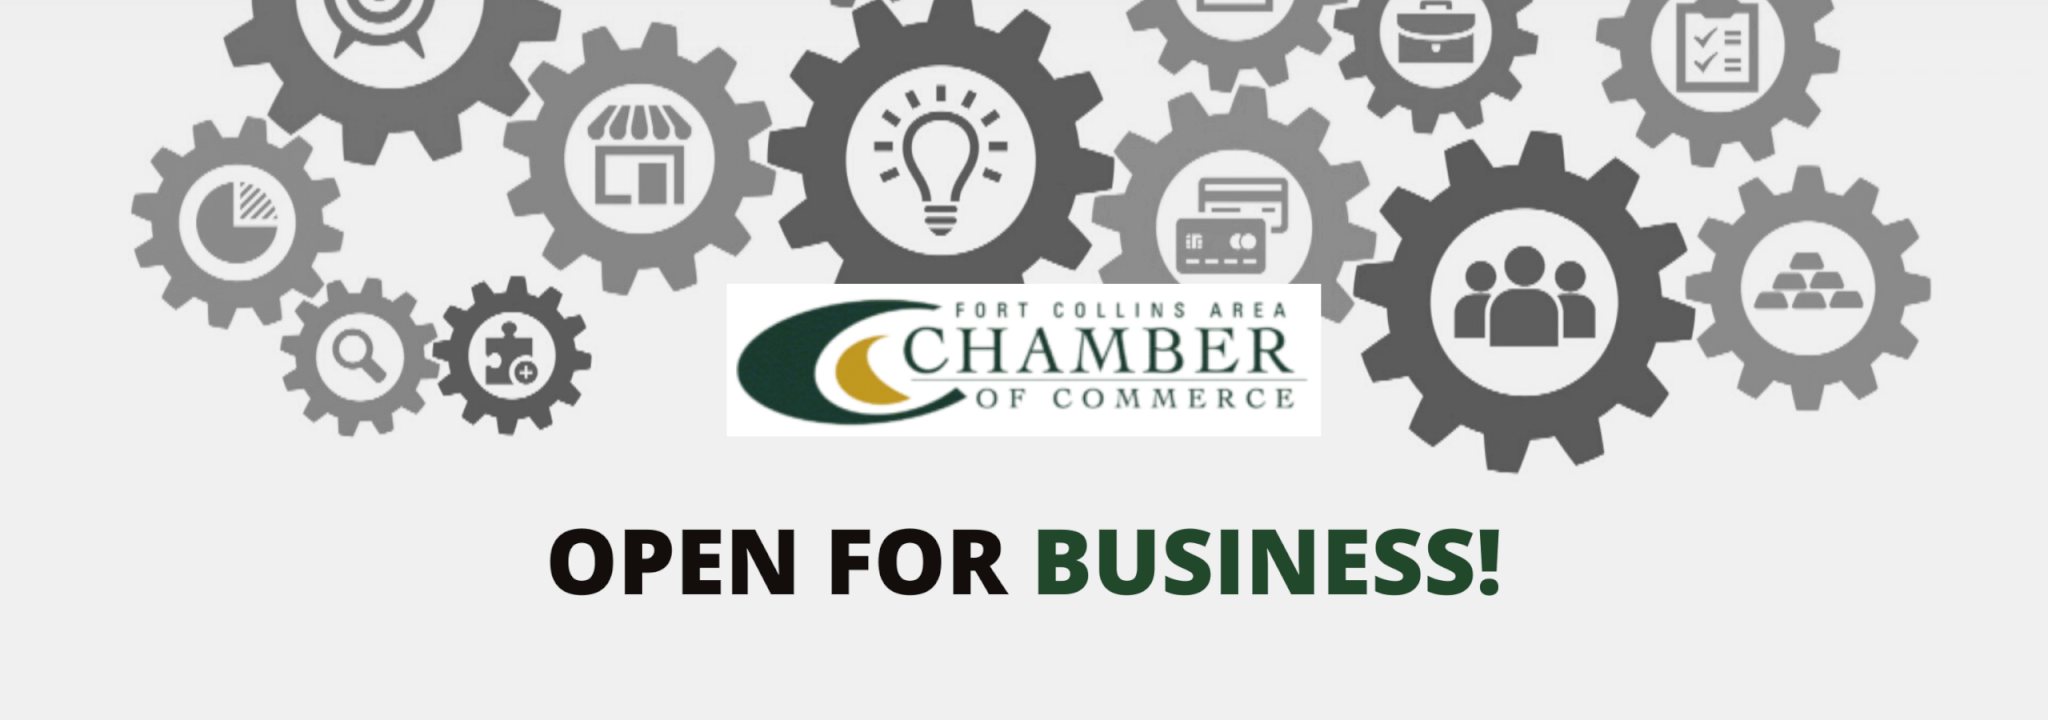 Open For Business Fort Collins Area Chamber Of Commerce